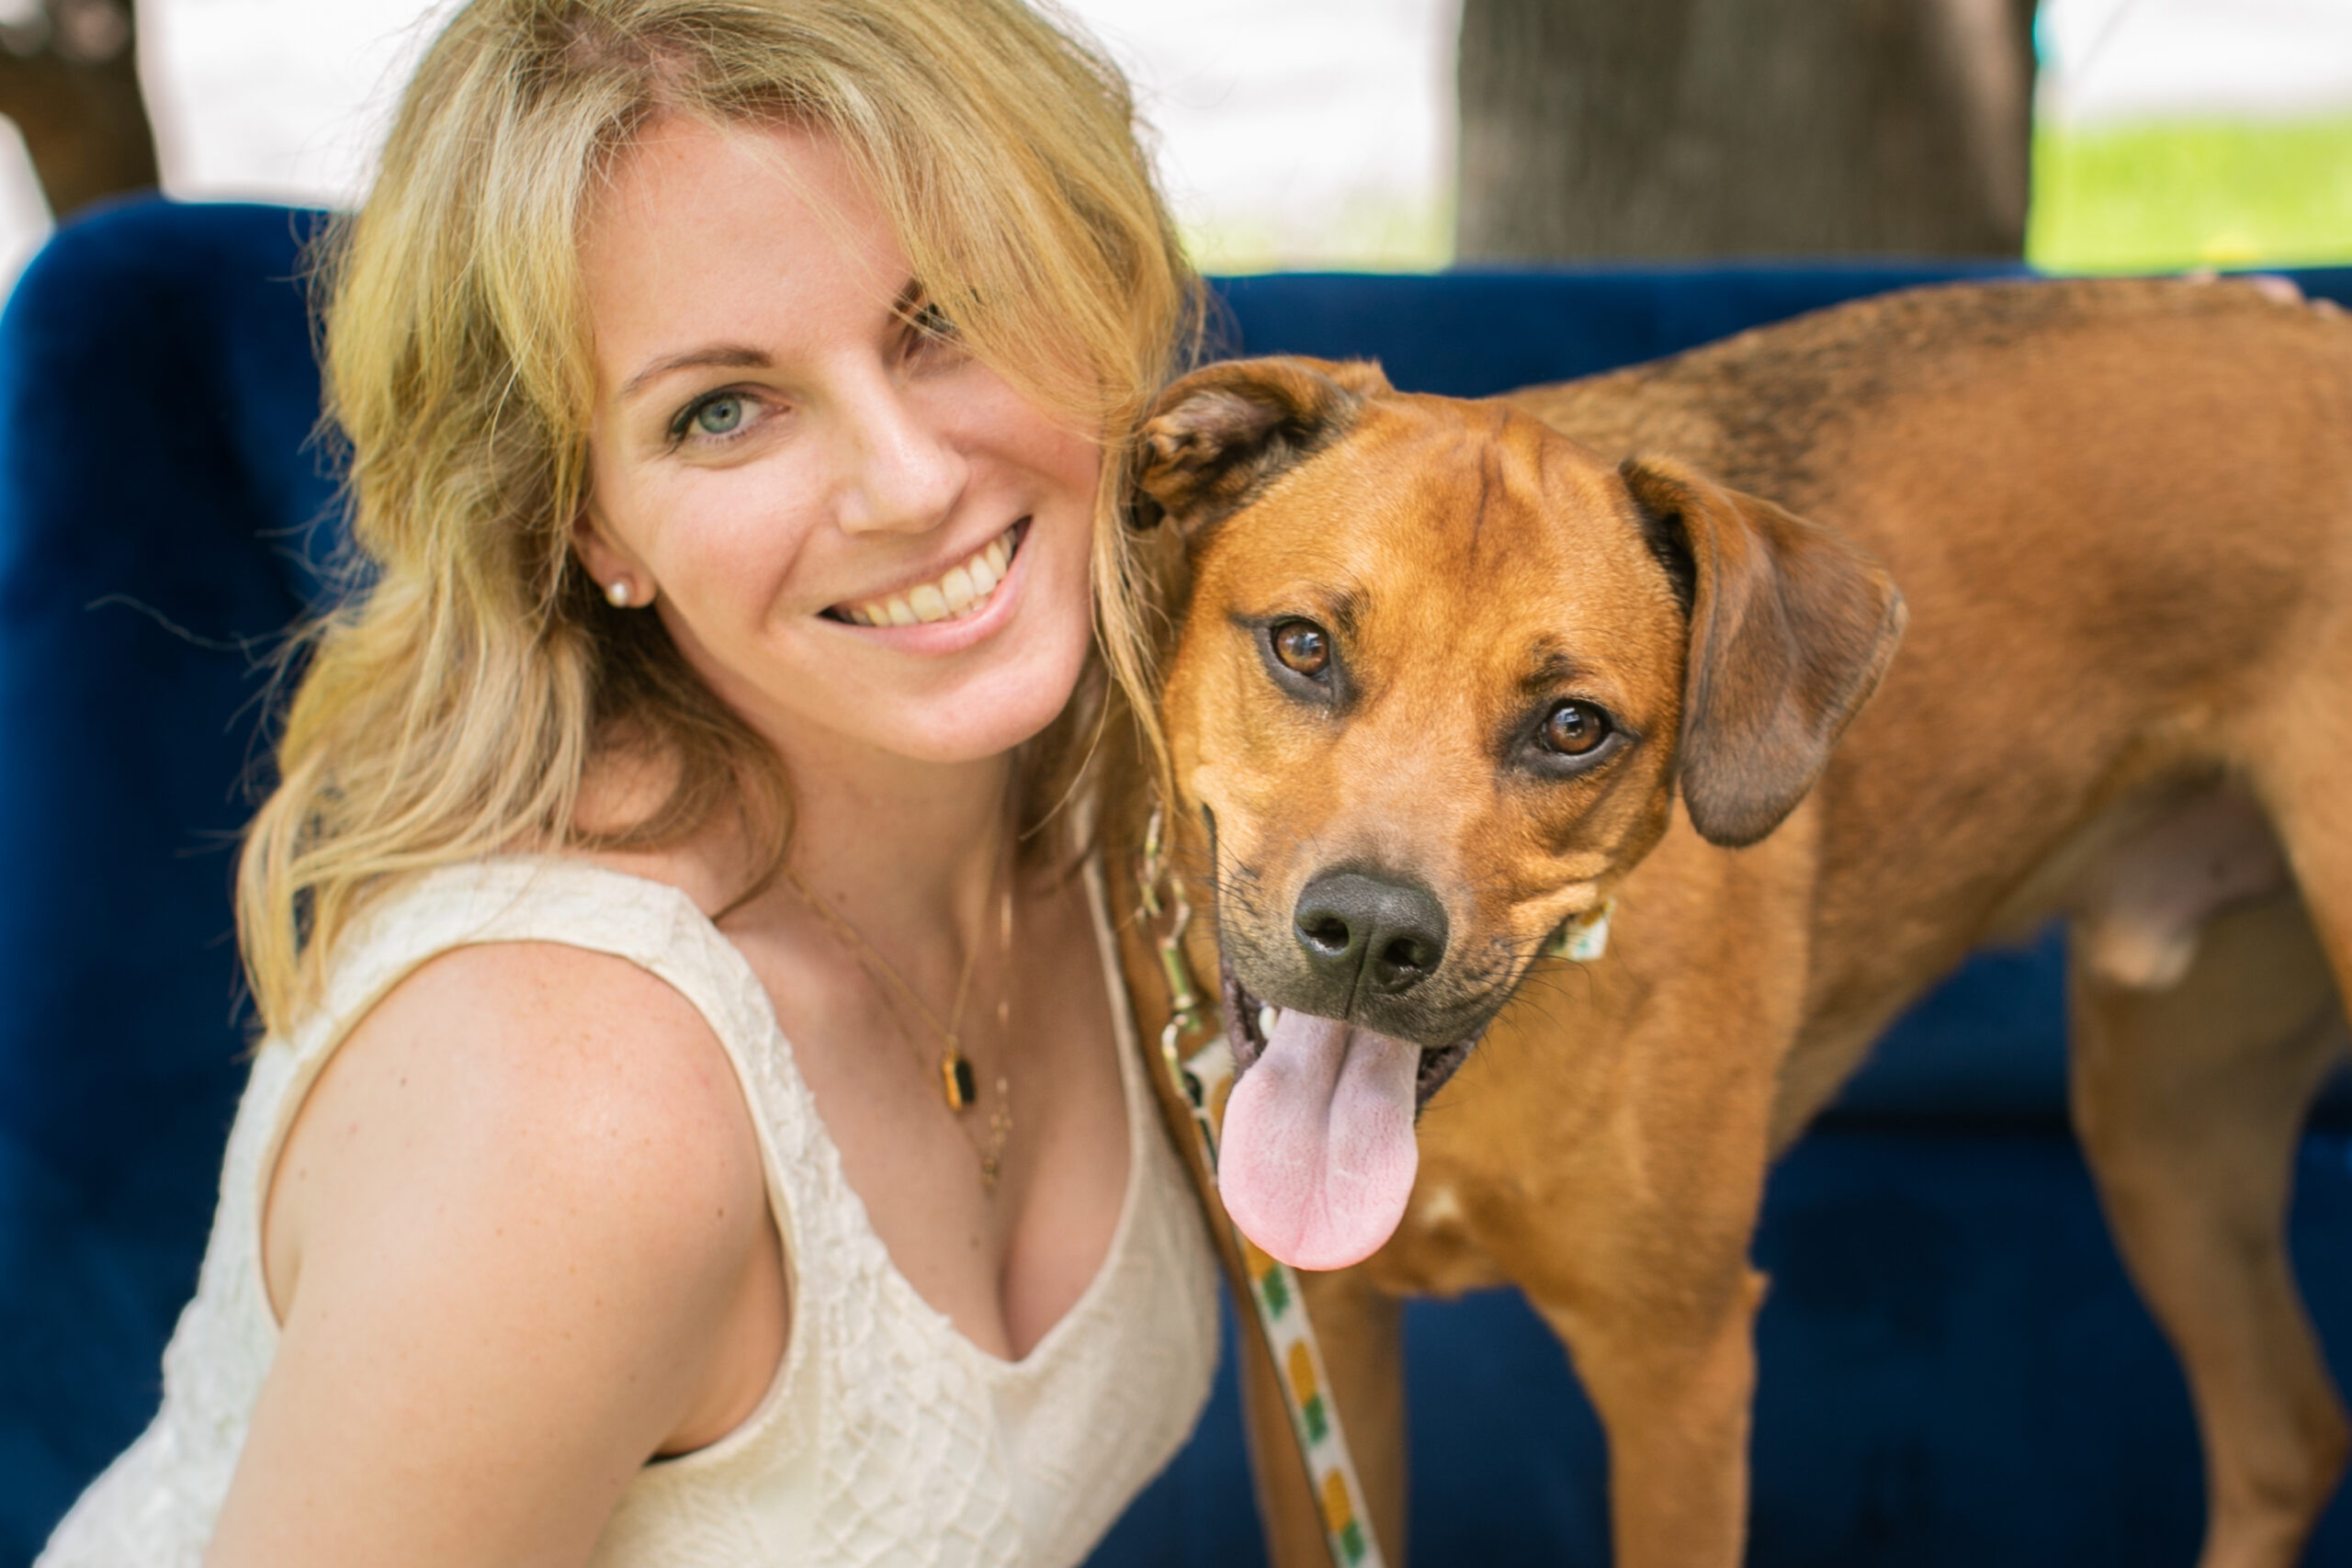 Doggy Social founder Lara Leinen poses with her rescue dog, Asbjorn.